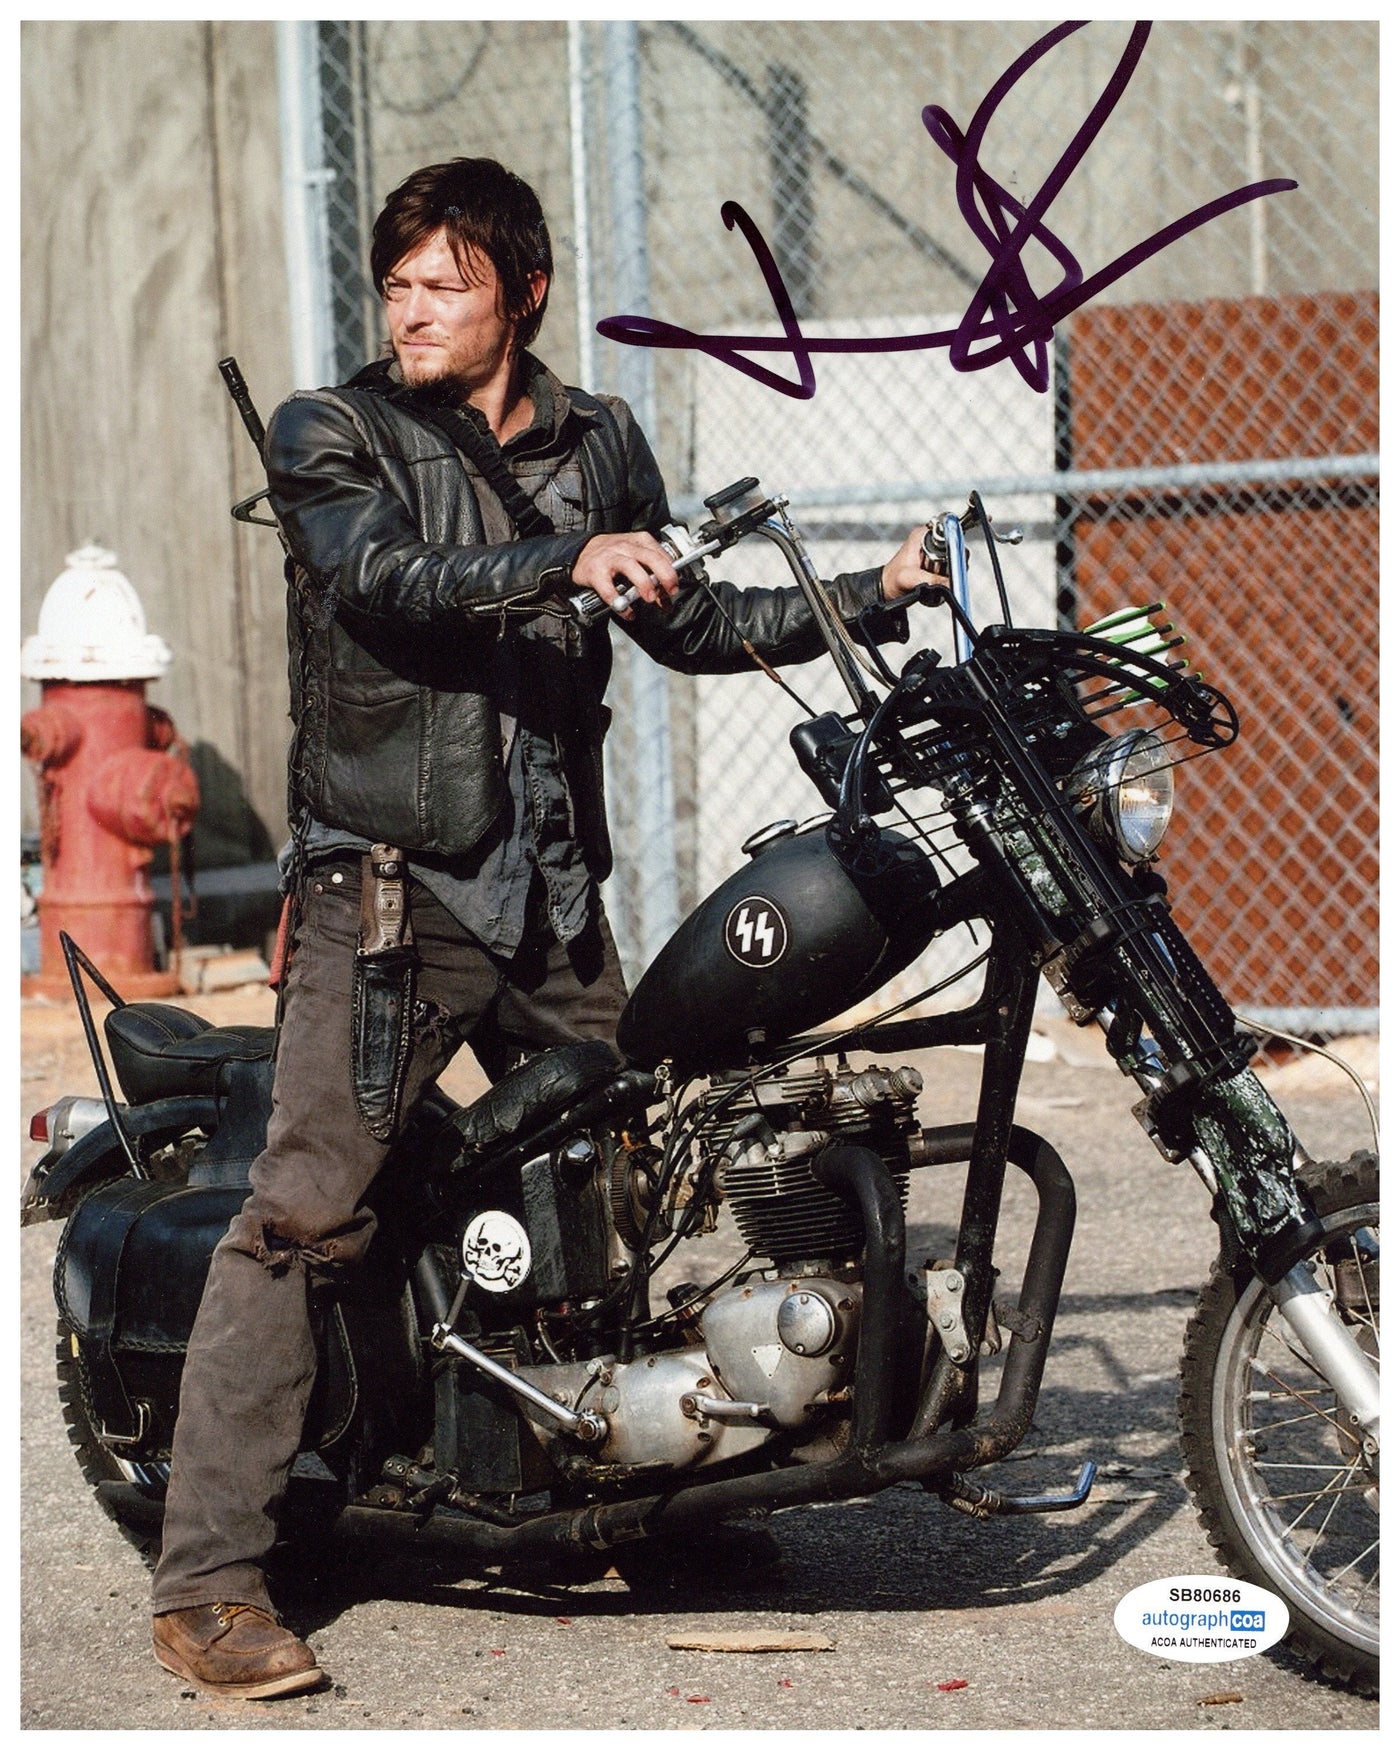 Norman Reedus Autographed 8x10 Photo The Walking Dead Daryl Dixon Signed ACOA